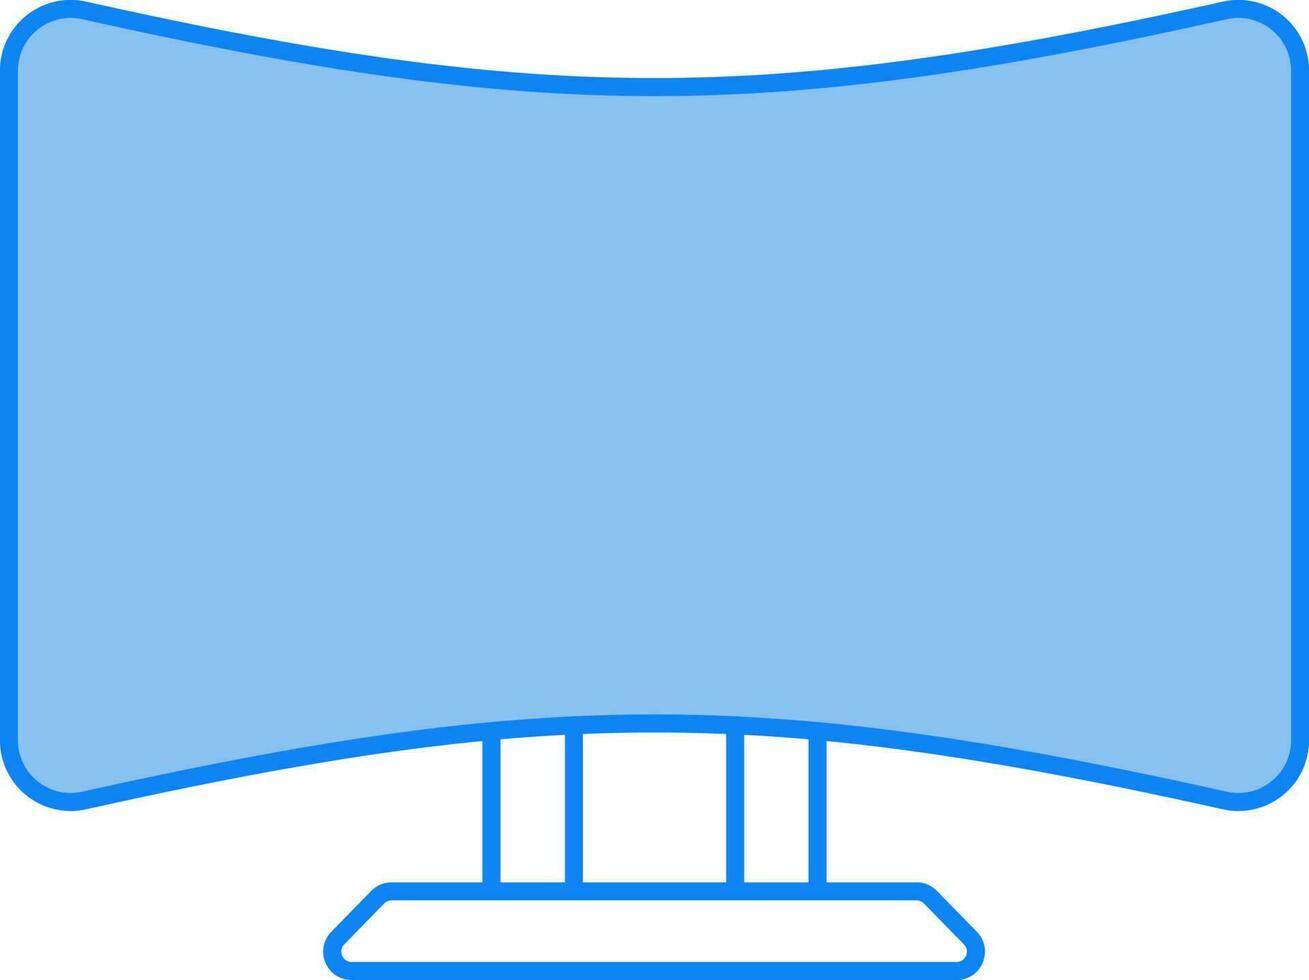 Curved Monitor Icon In Blue And White Color. vector